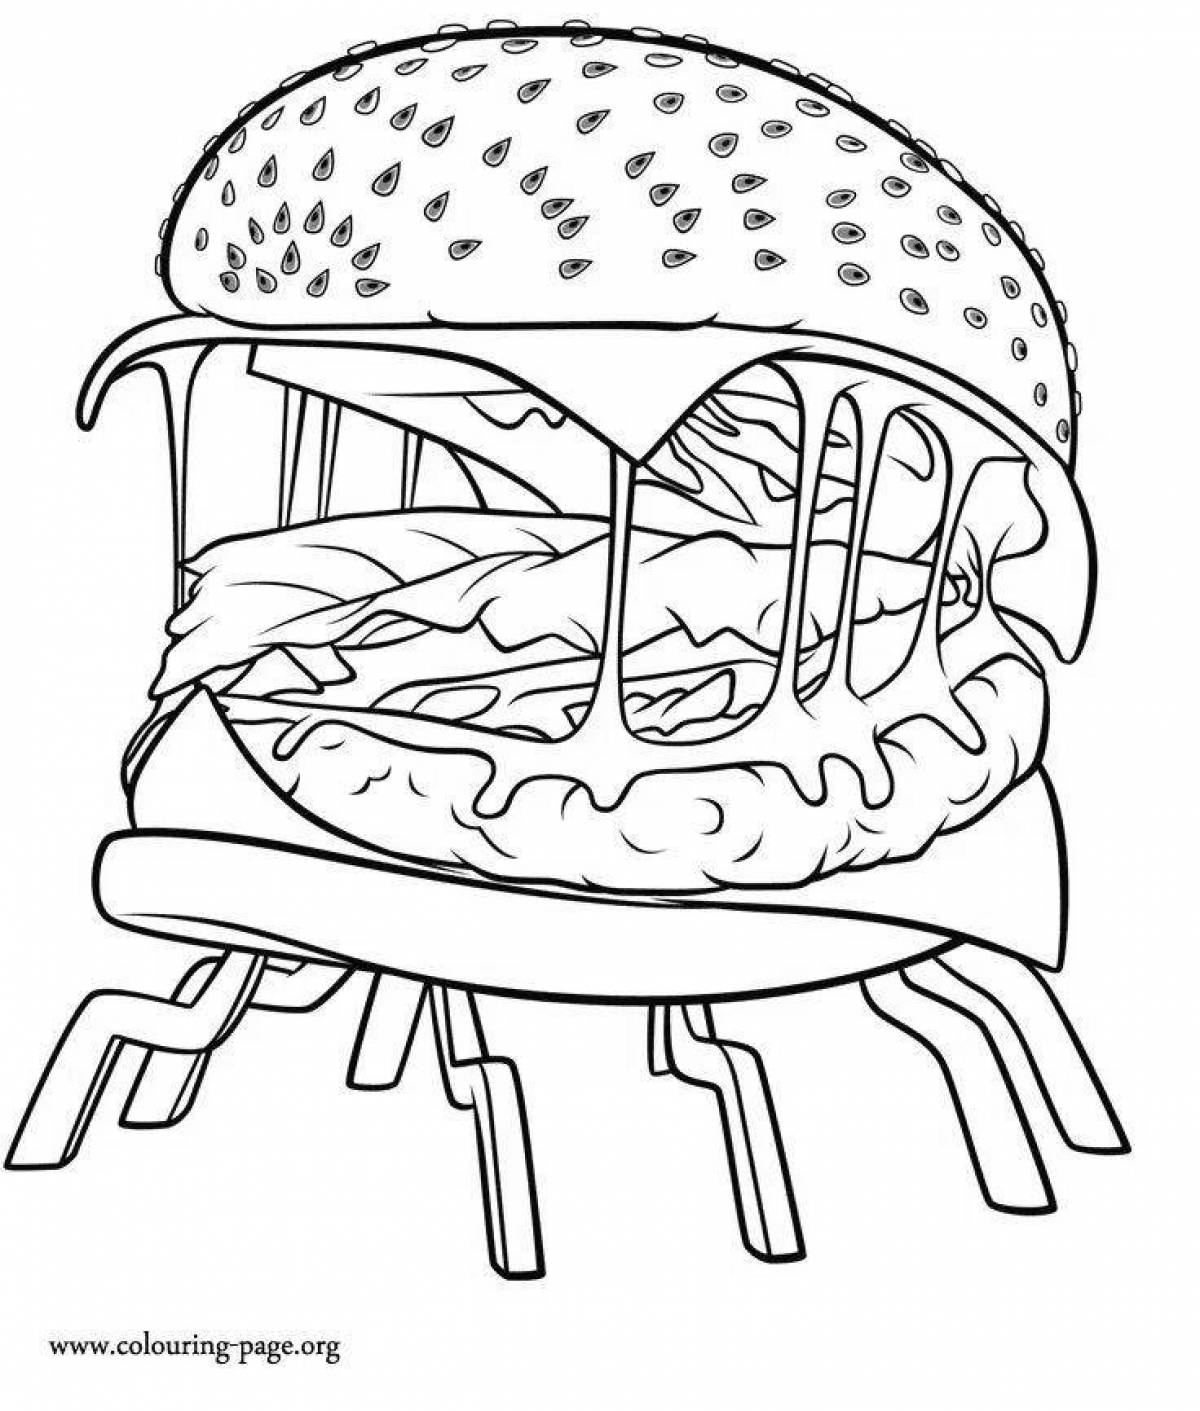 Great burger coloring book for kids